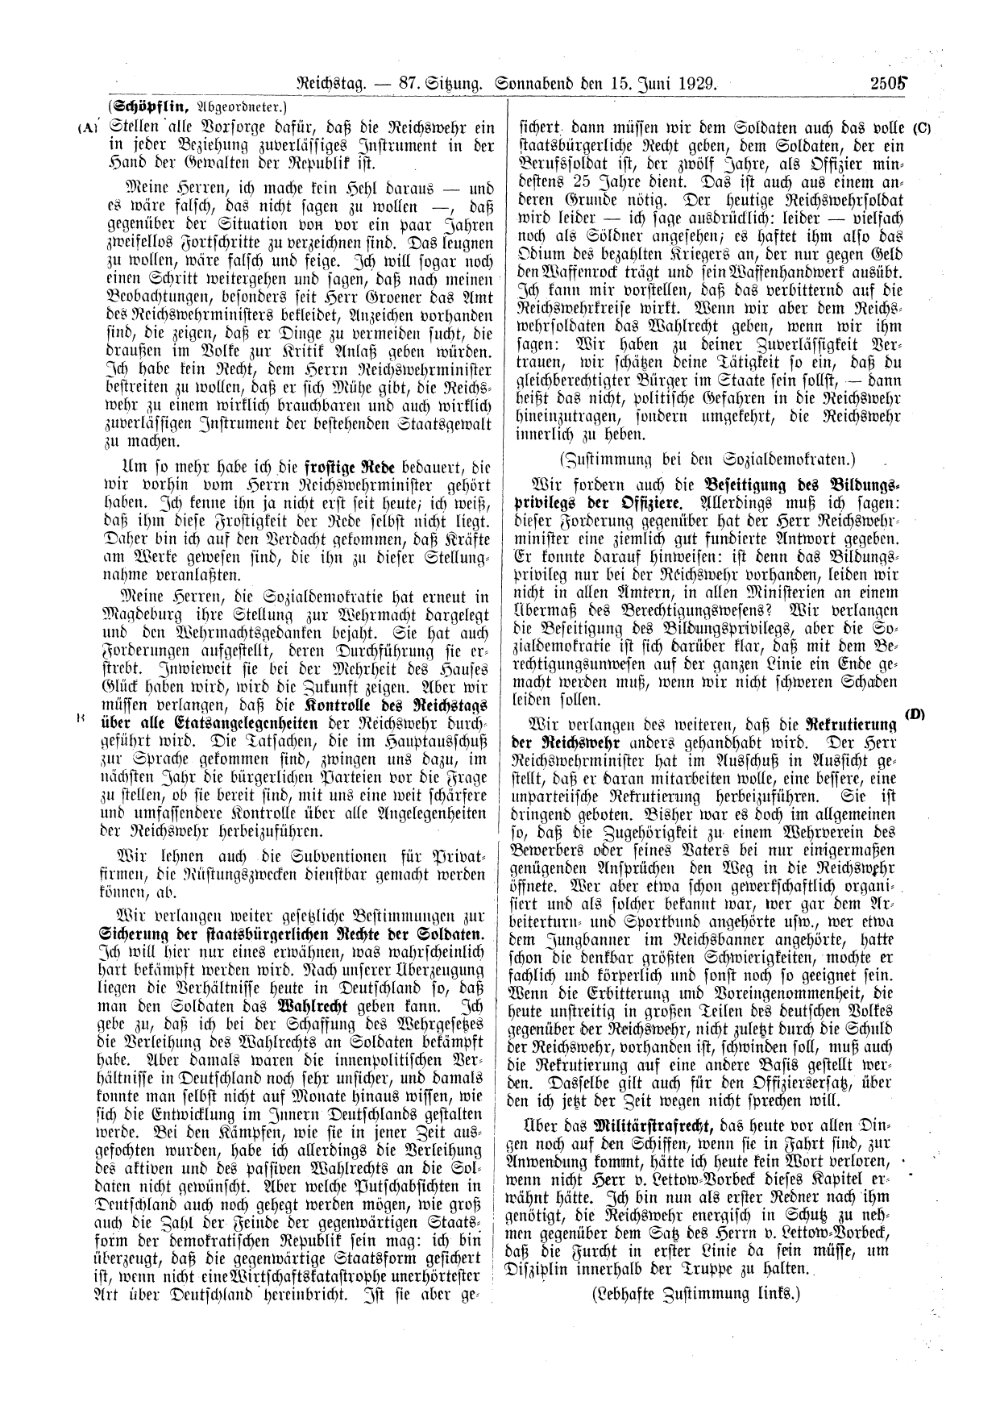 Scan of page 2505